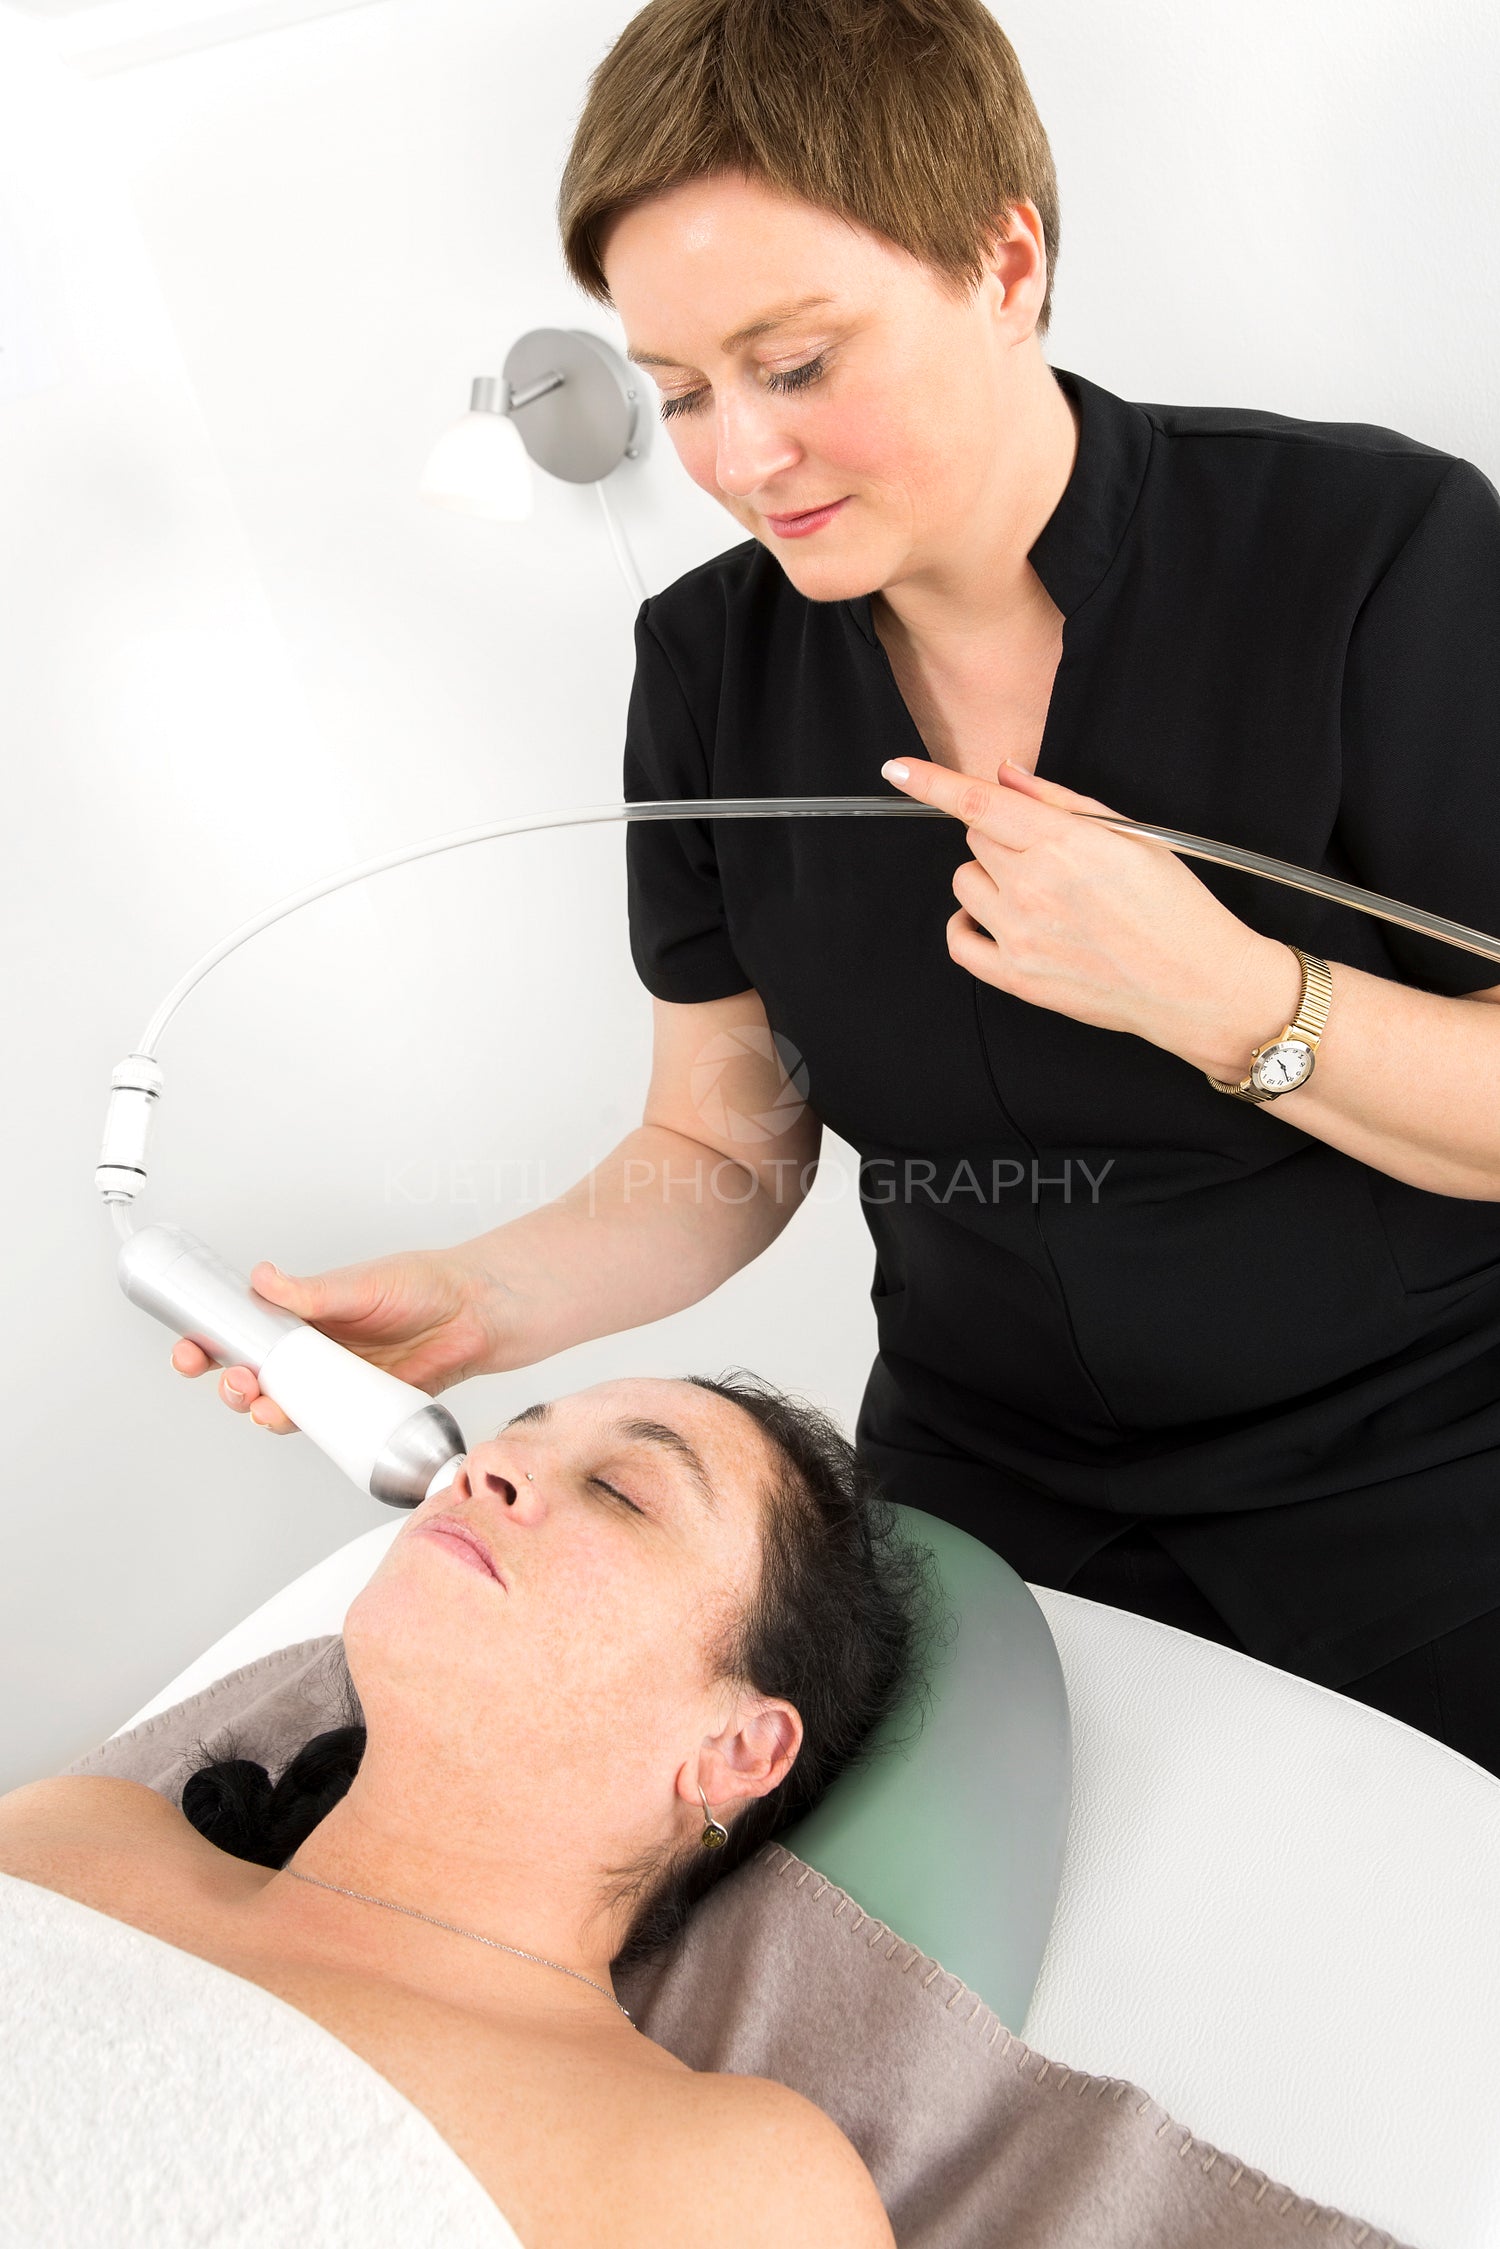 Woman client gets face slimming treatment at beauty clinic